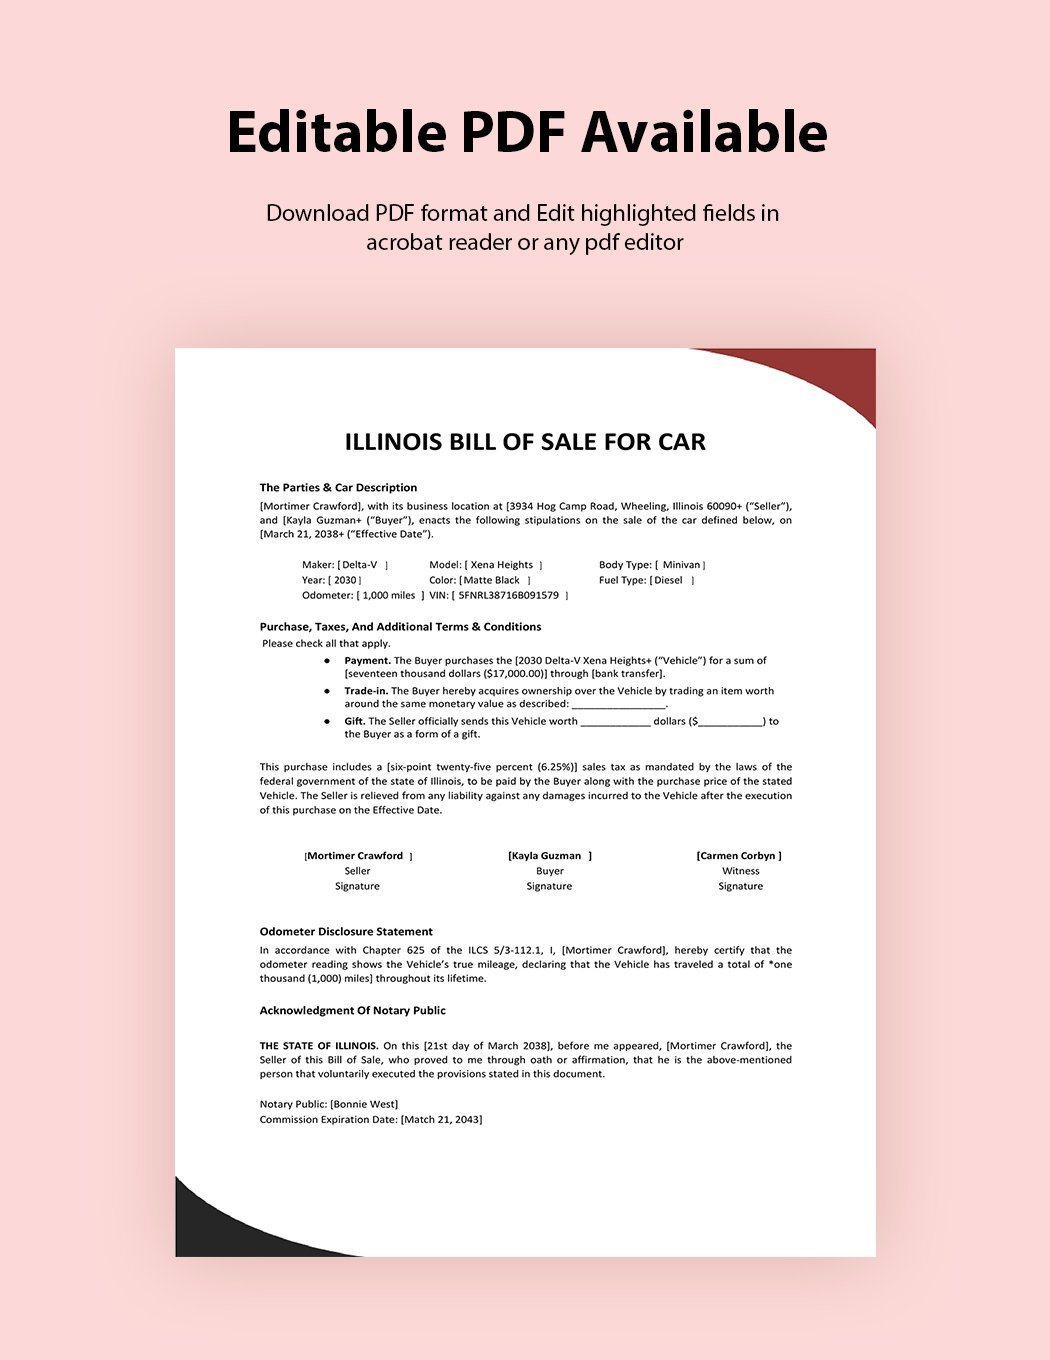 Illinois Bill of Sale For Car Template